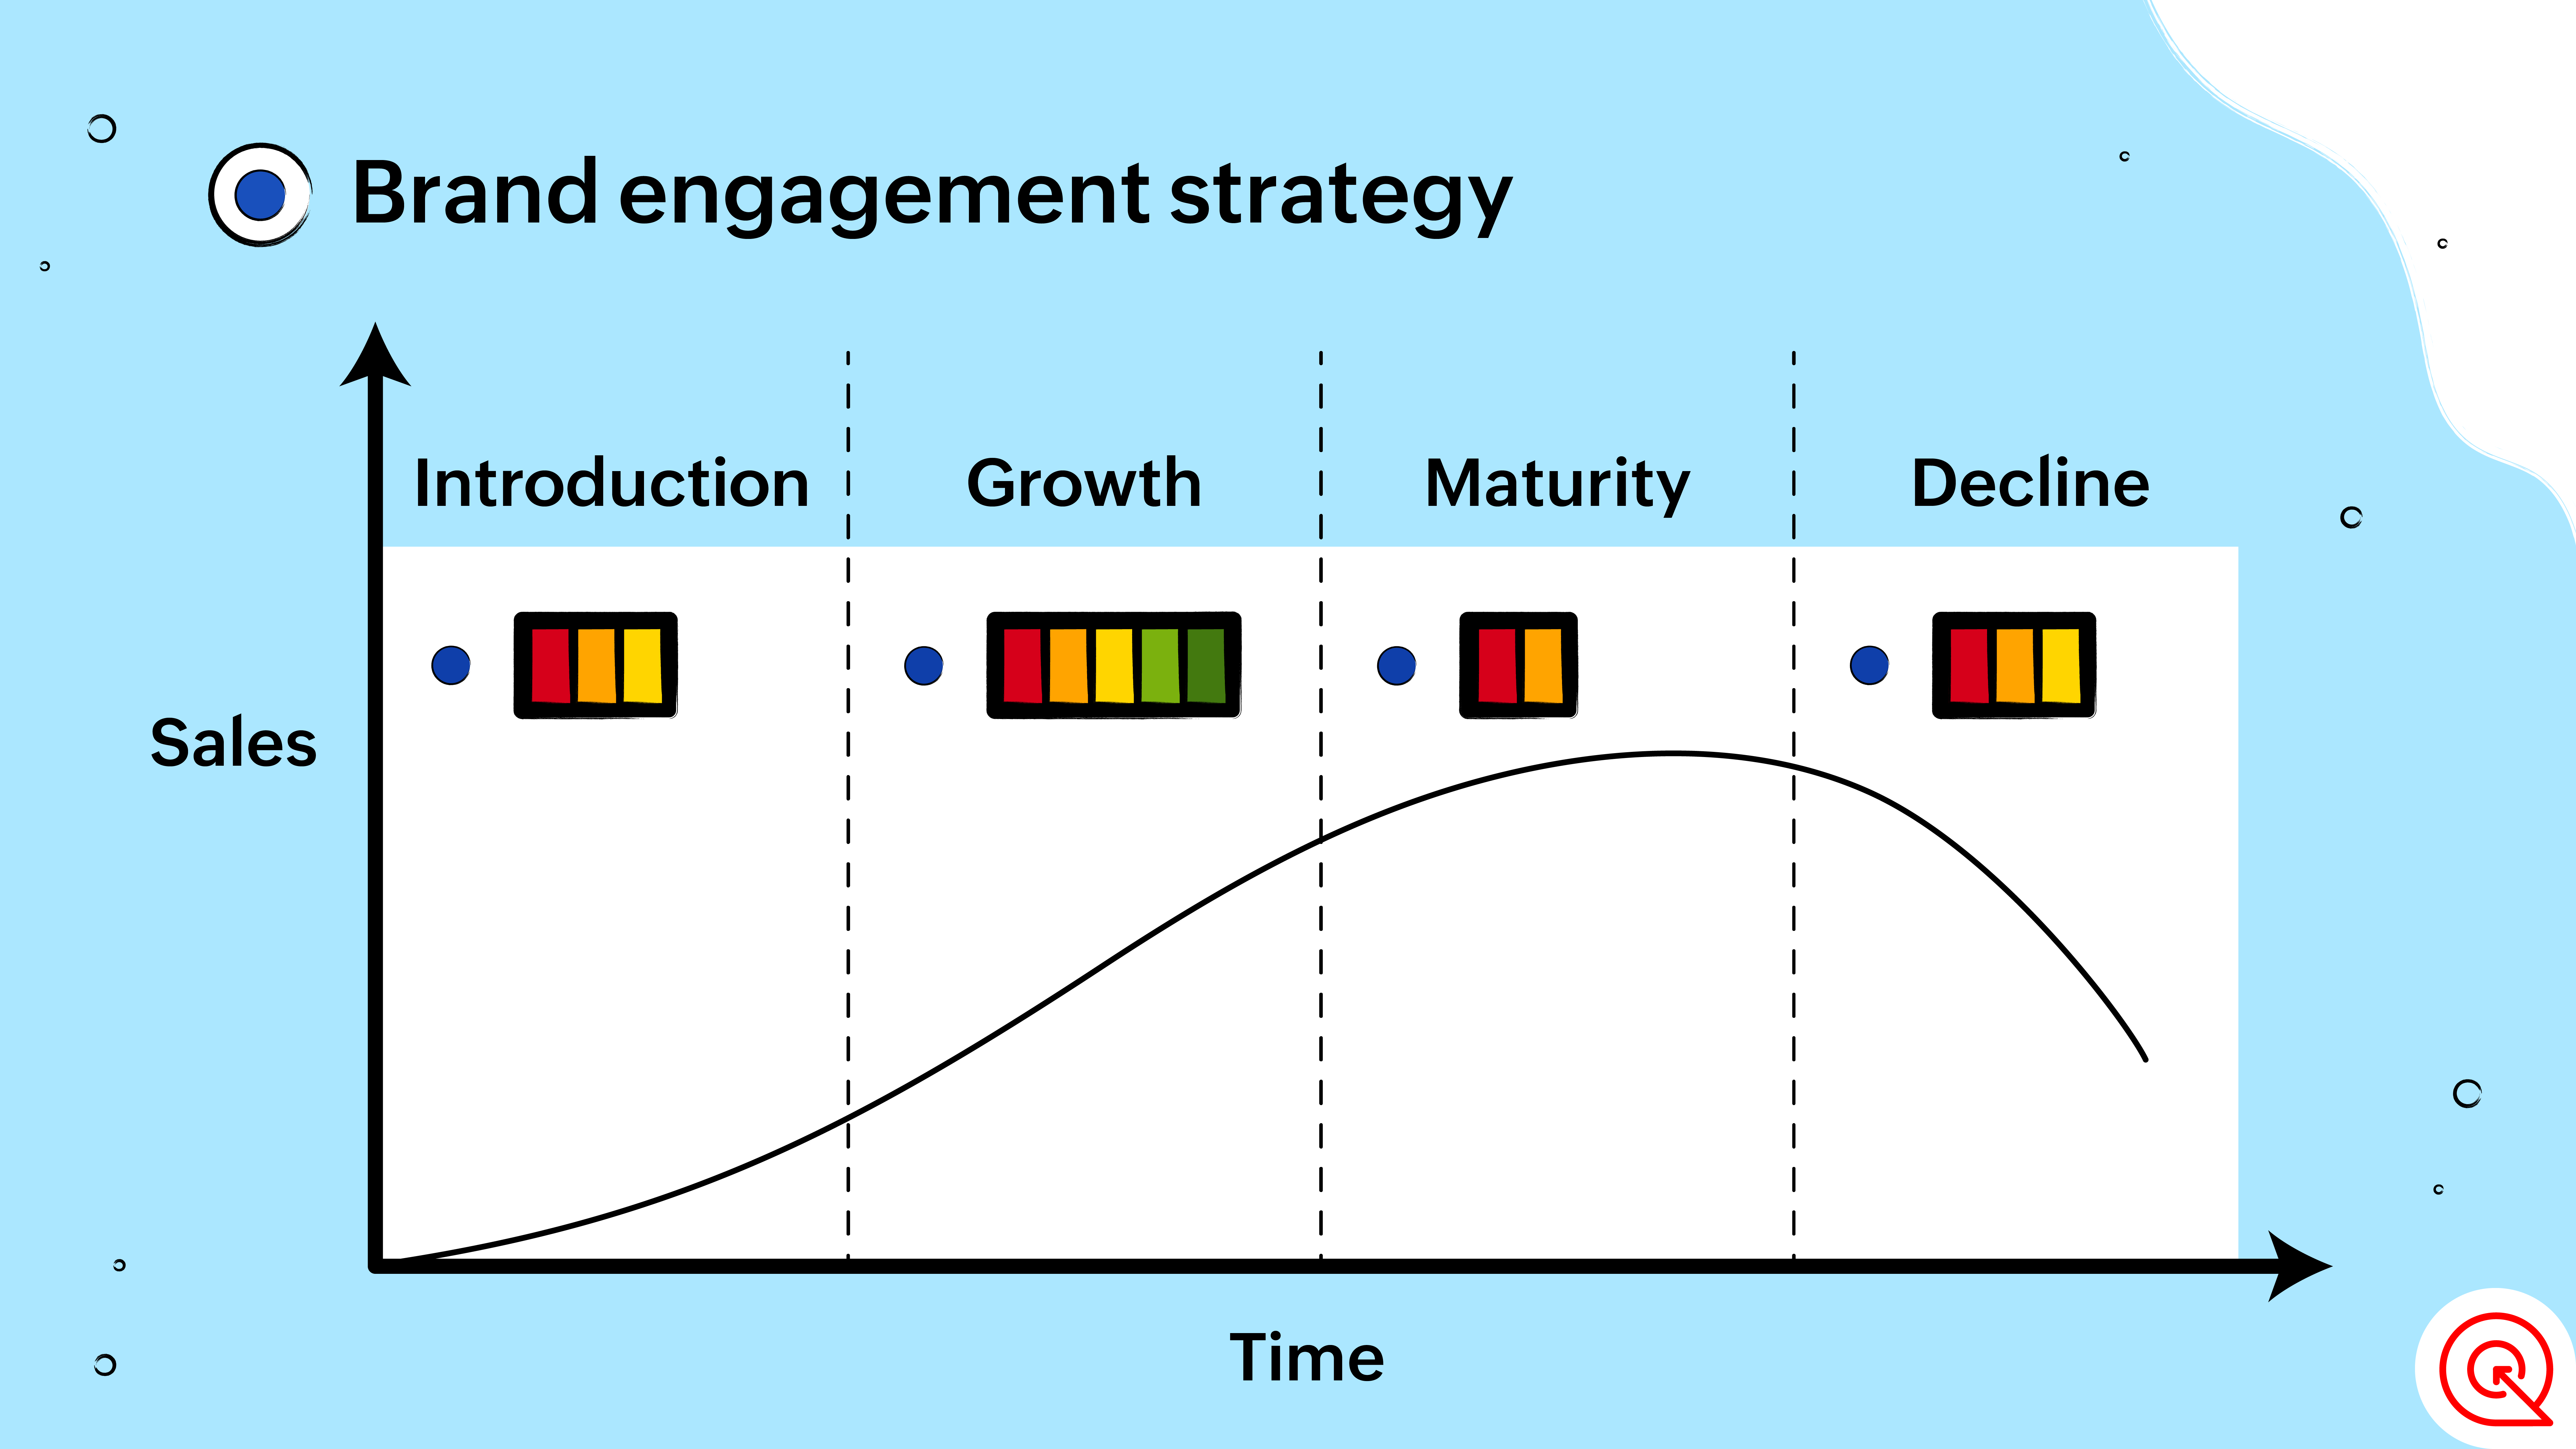 Brand engagement strategy curve